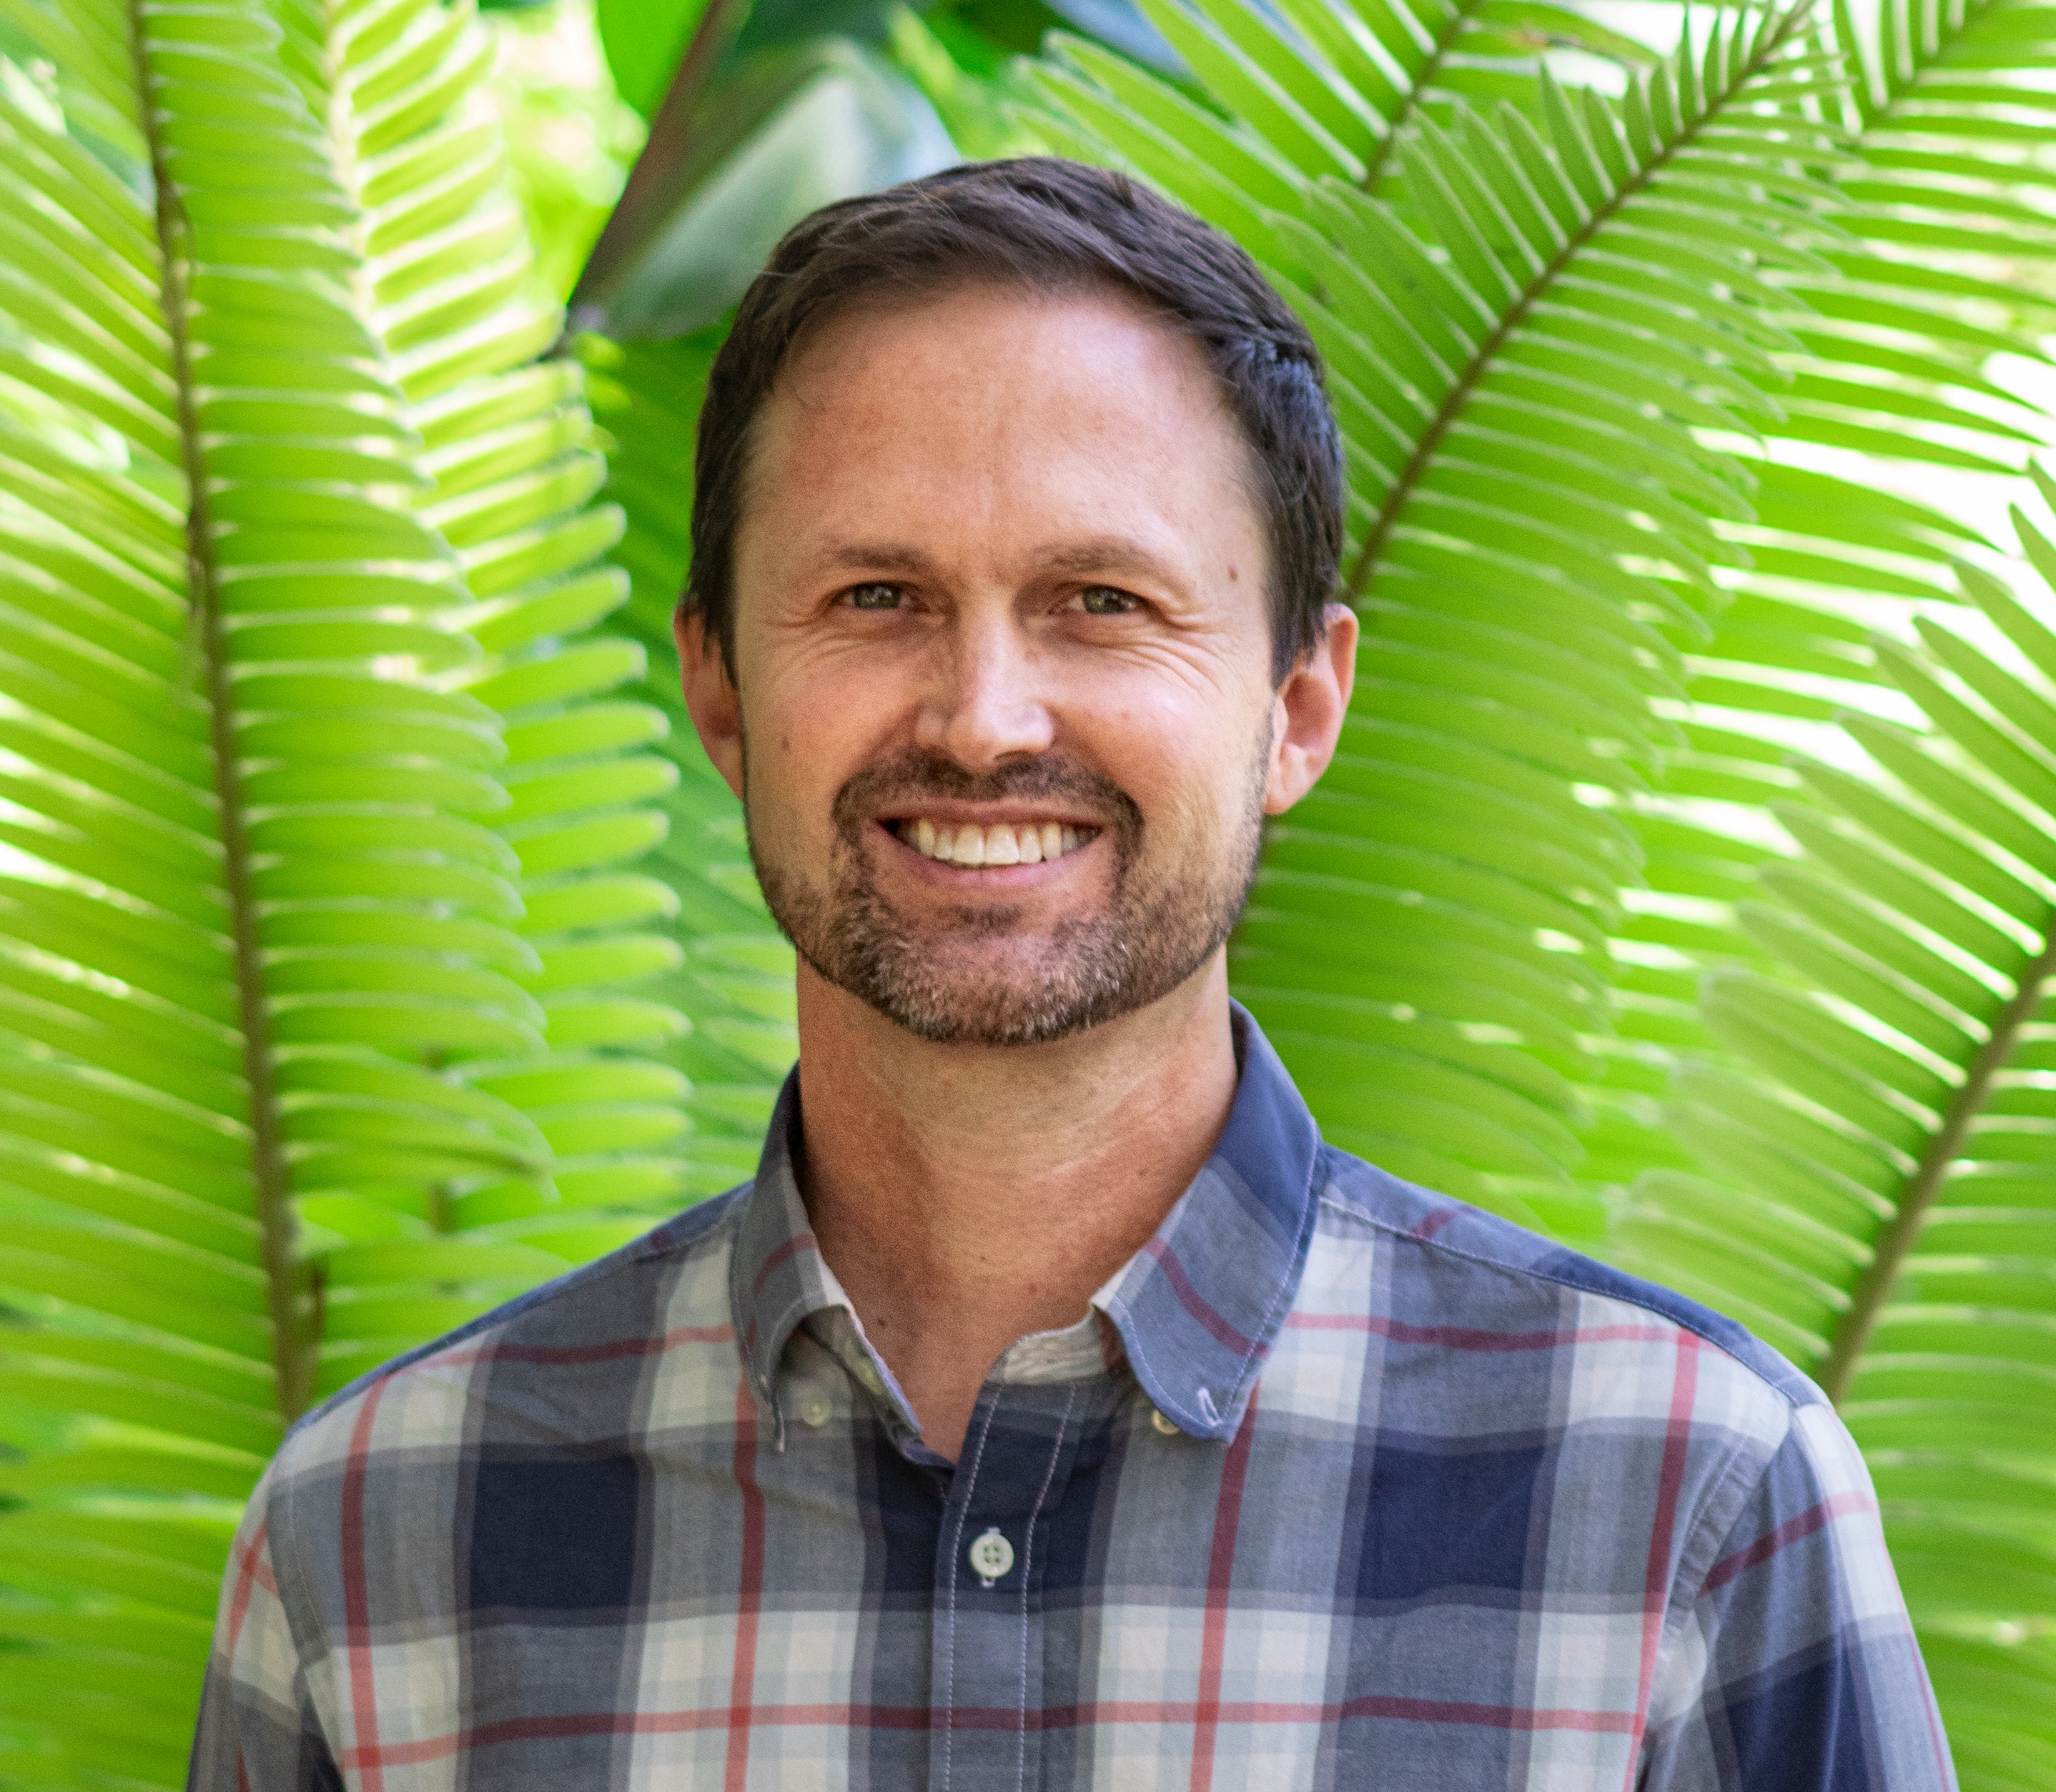 A bearded man in a collared shirt sands in front of a plant with fronds